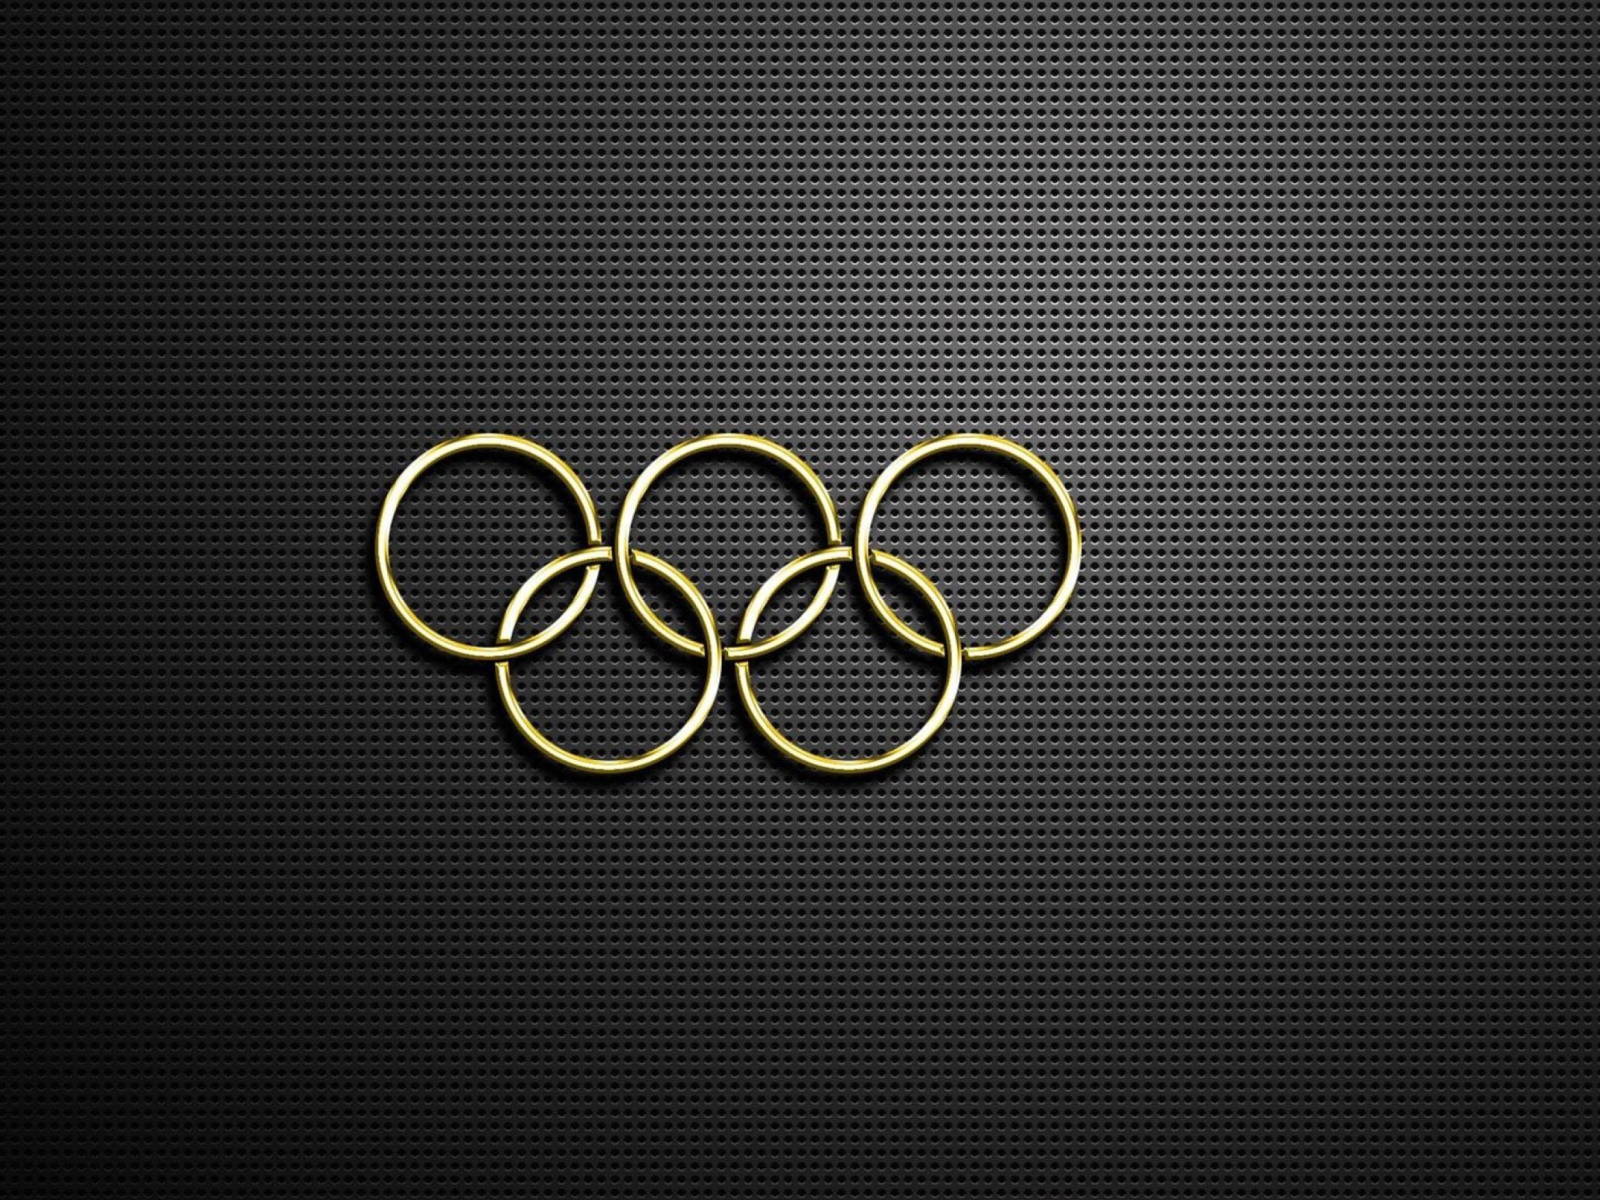 Olympic Games wallpaper 1600x1200